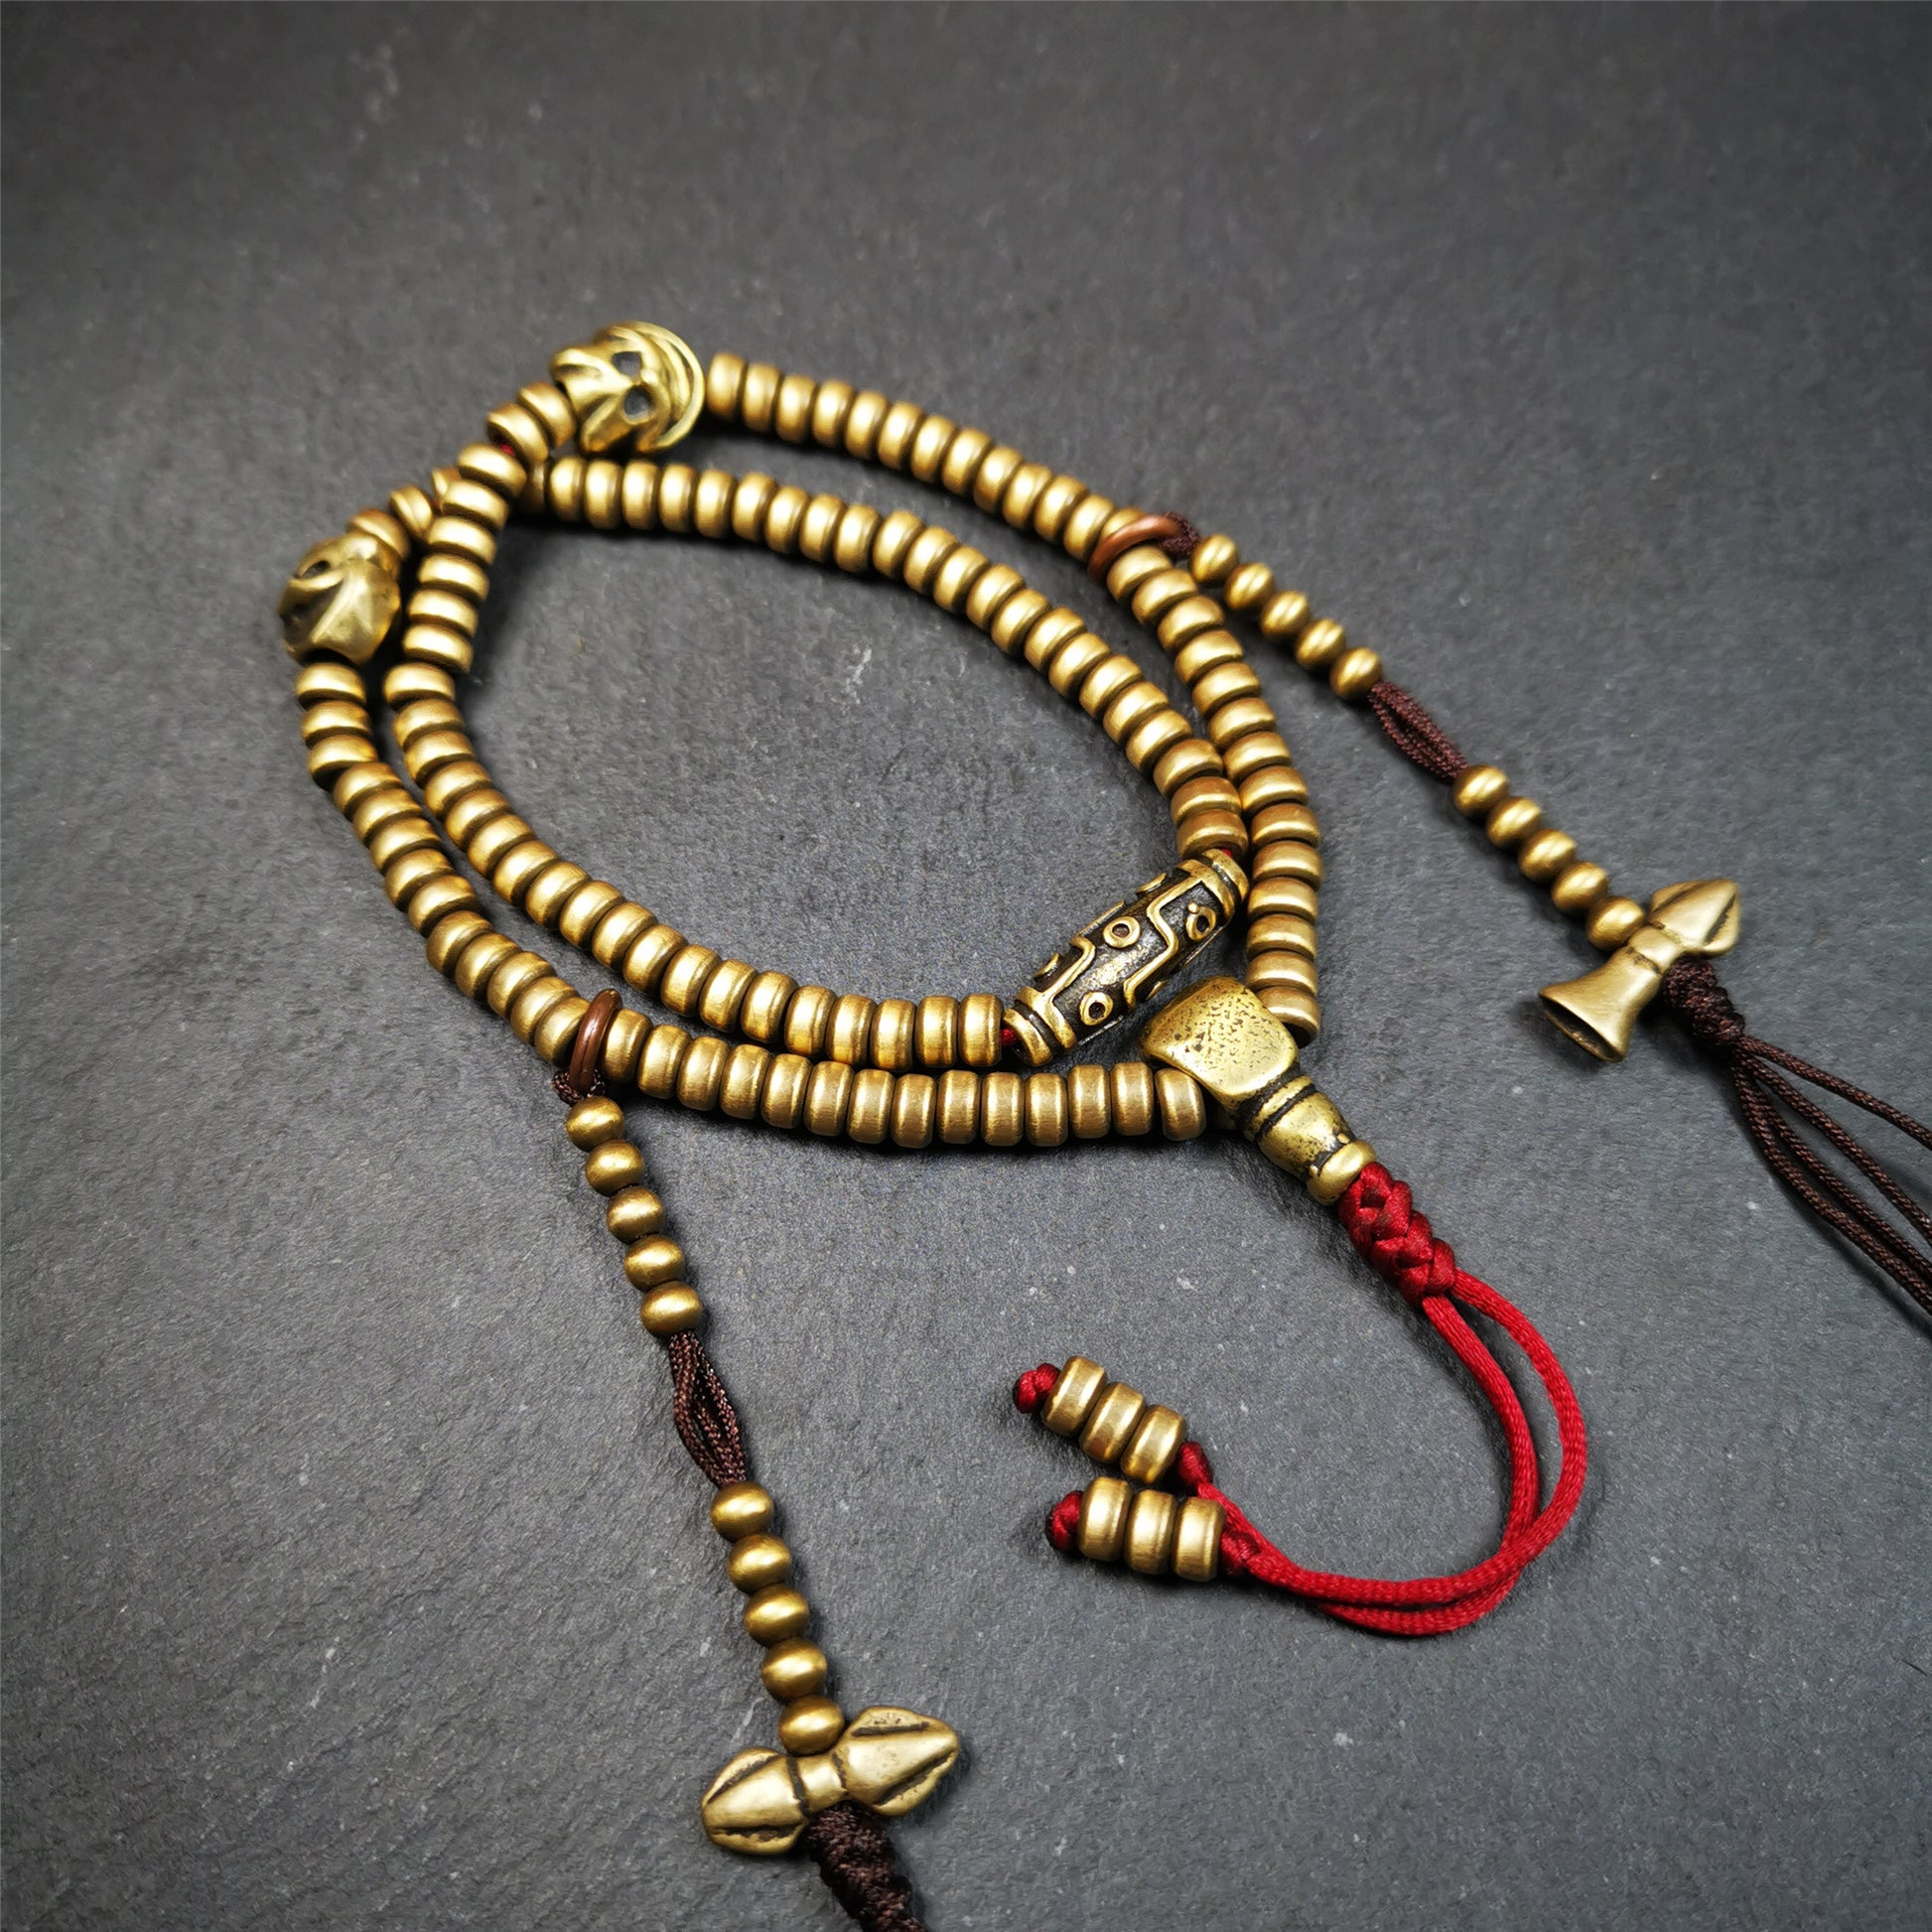 This mala was collect from Hepo Town Baiyu County Tibet 30 years ago, blessed in Yaqing Monastry. The necklace is made of lima brass, total 4 marker beads on it, and 1 set of bead counters ,very delicate and rare.